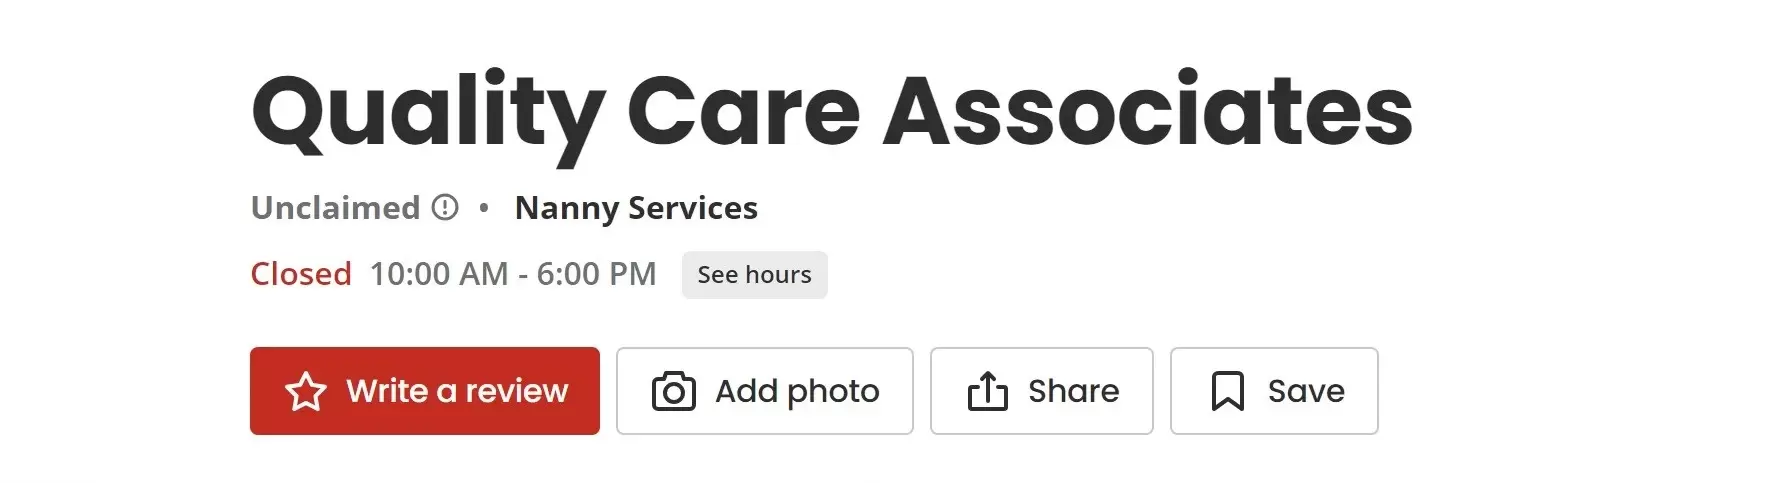 Quality Care Associates Yelp Page